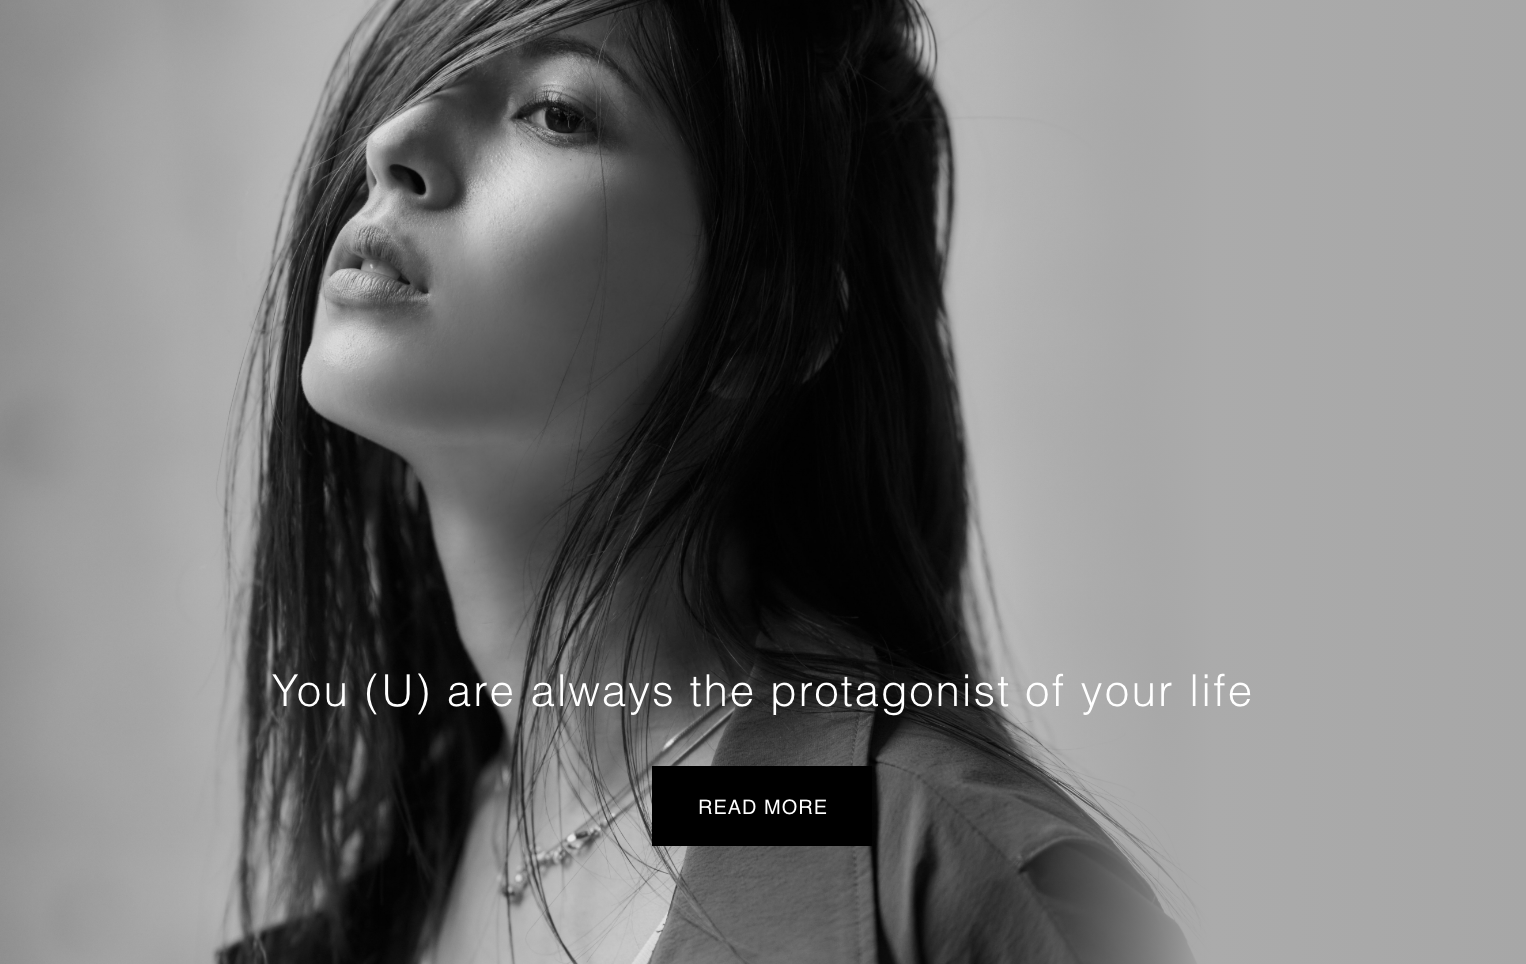 You (U) are always the protagonist of your life